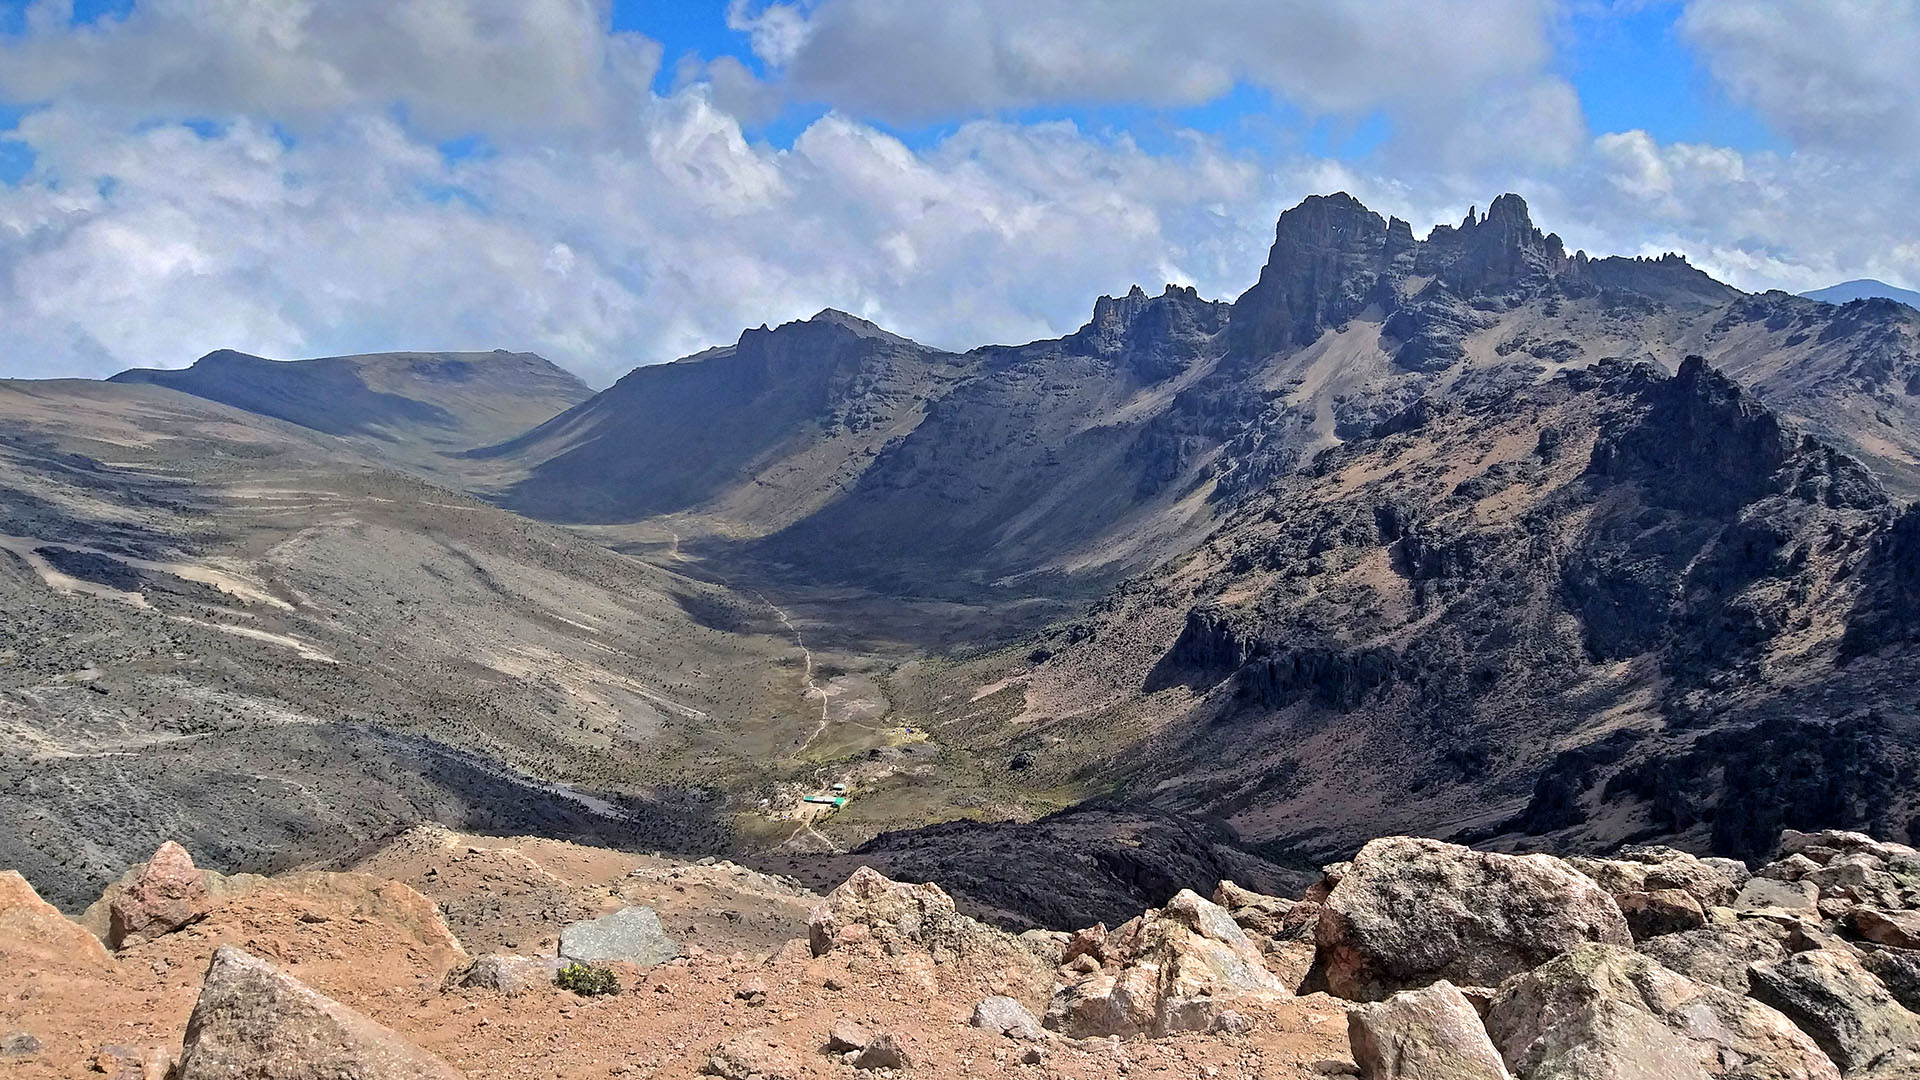 A view down on the valley from Mount Kenya